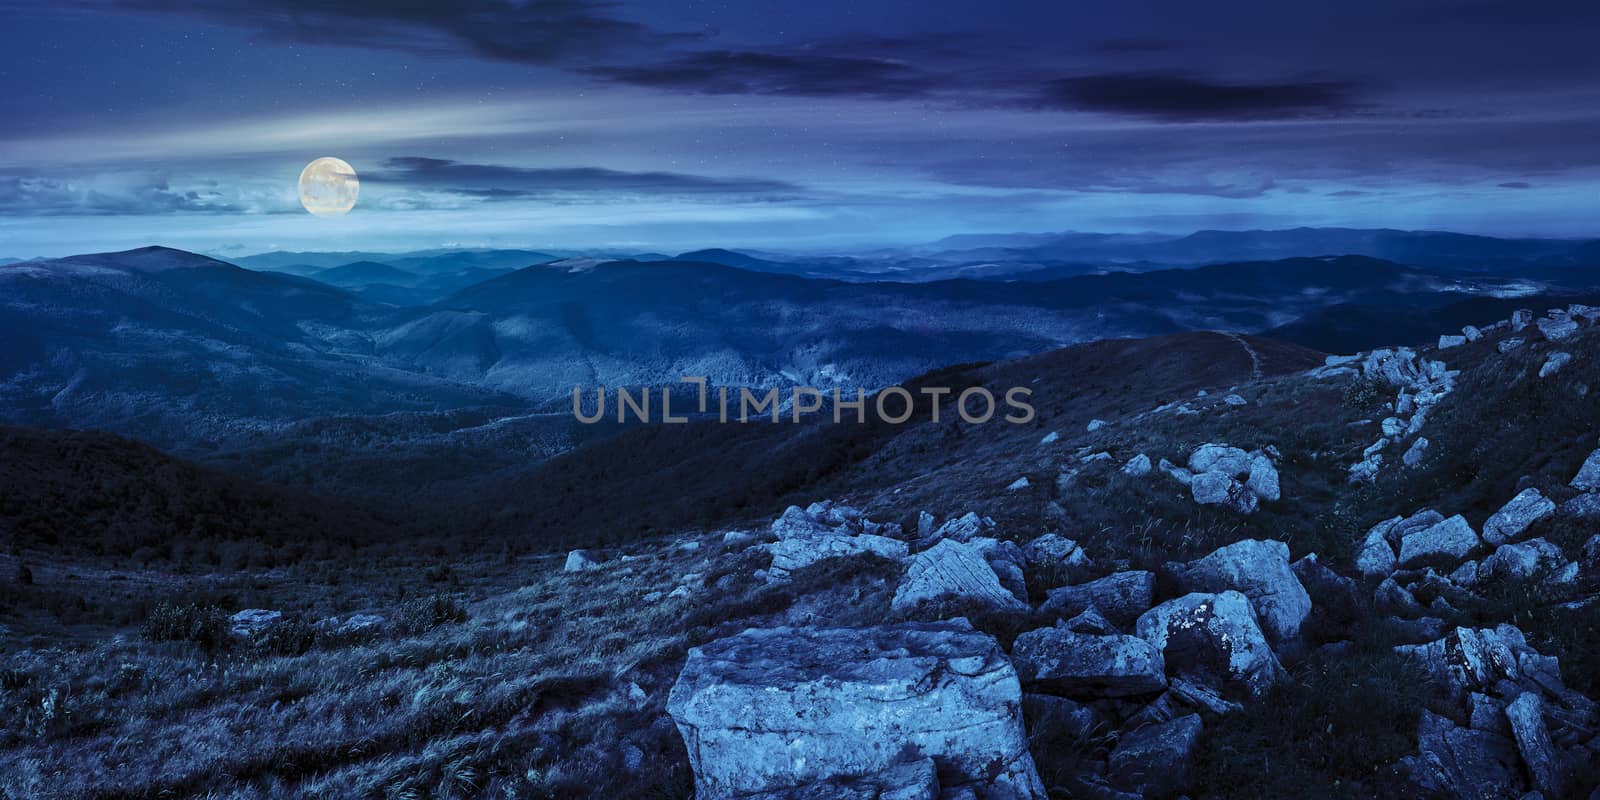 stones in valley on top of mountain range at night by Pellinni